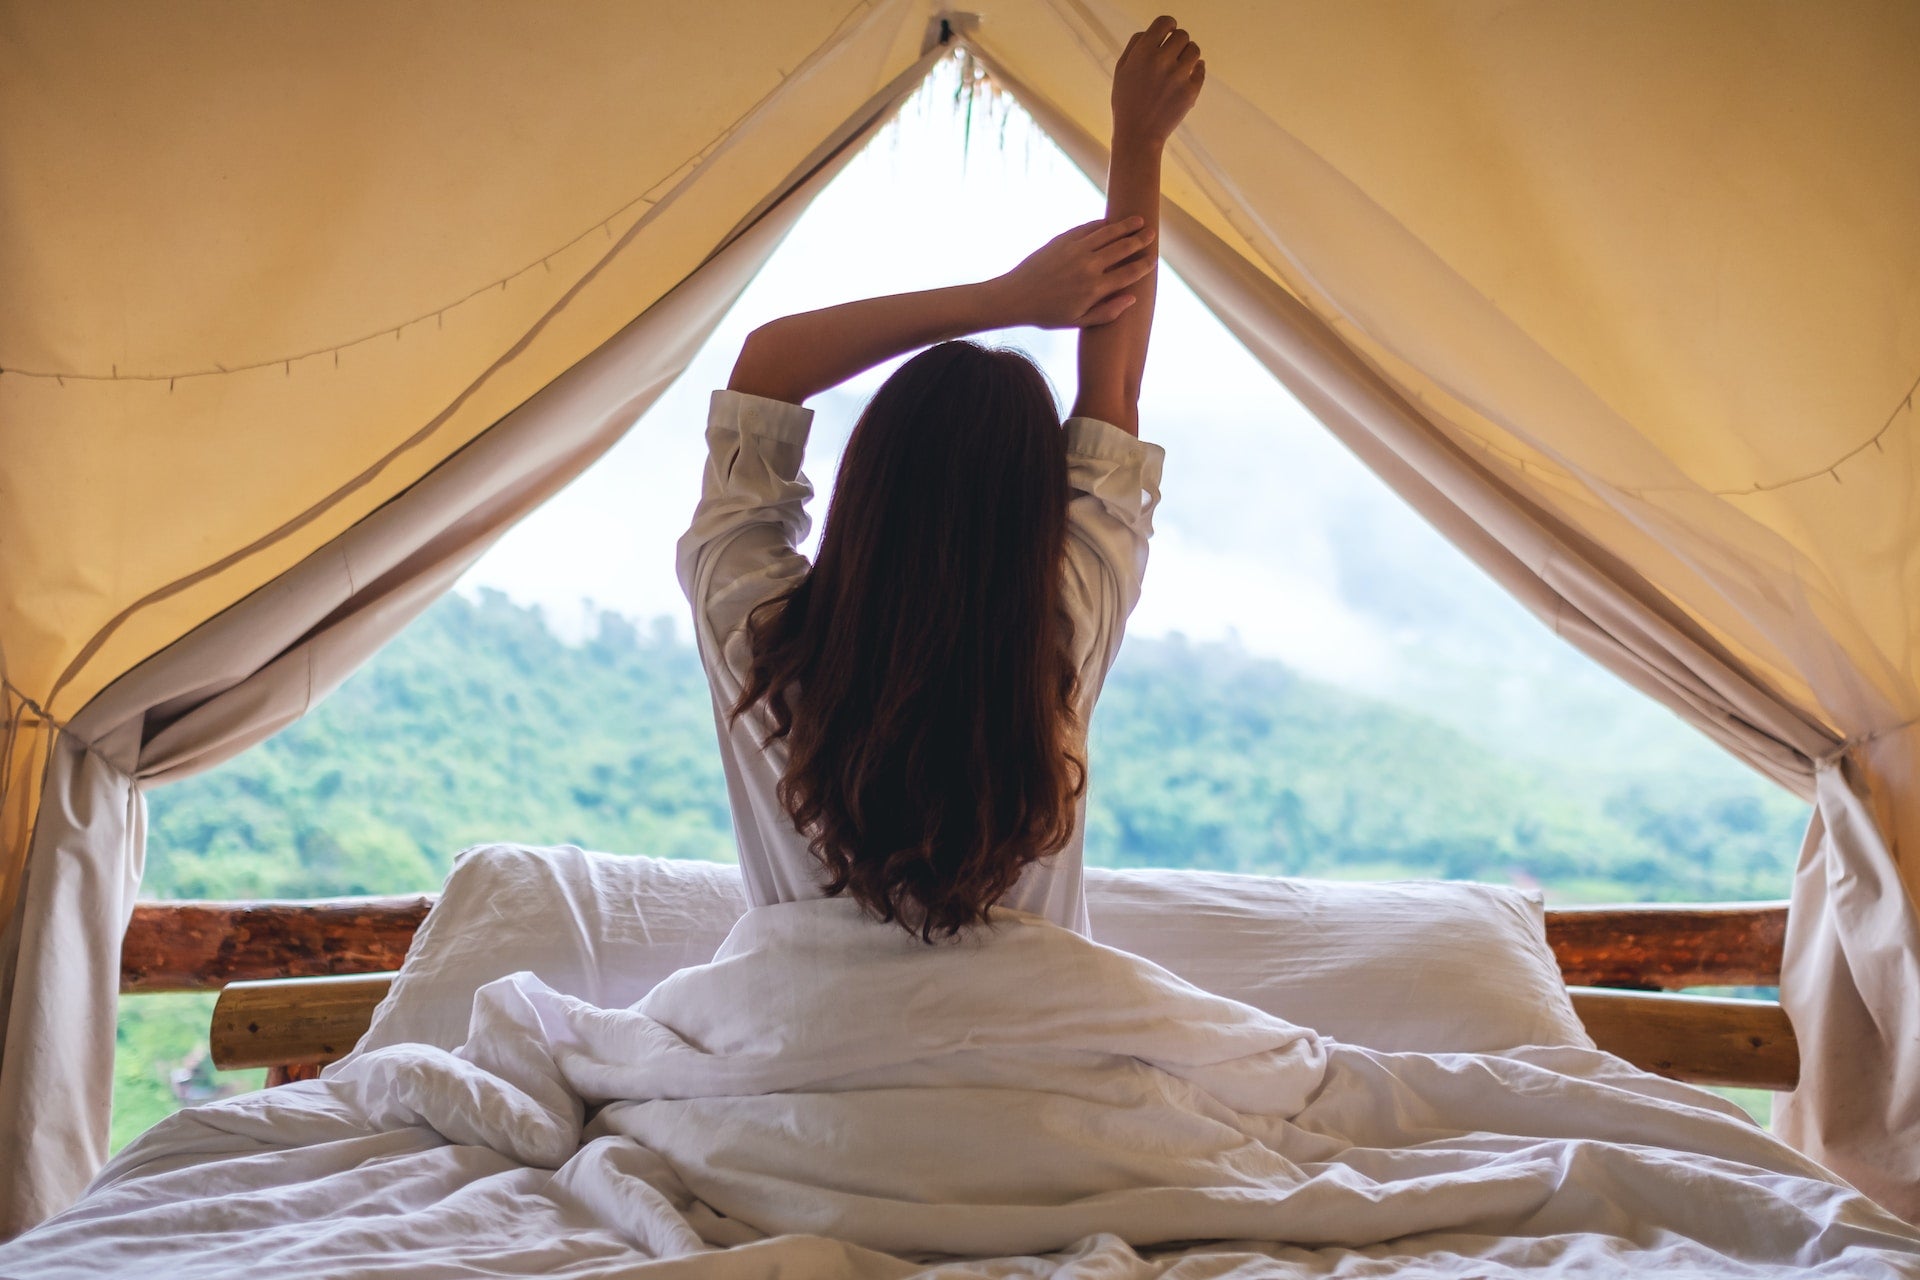 Woman stretching while sitting in bed in a tent overlooking a vista